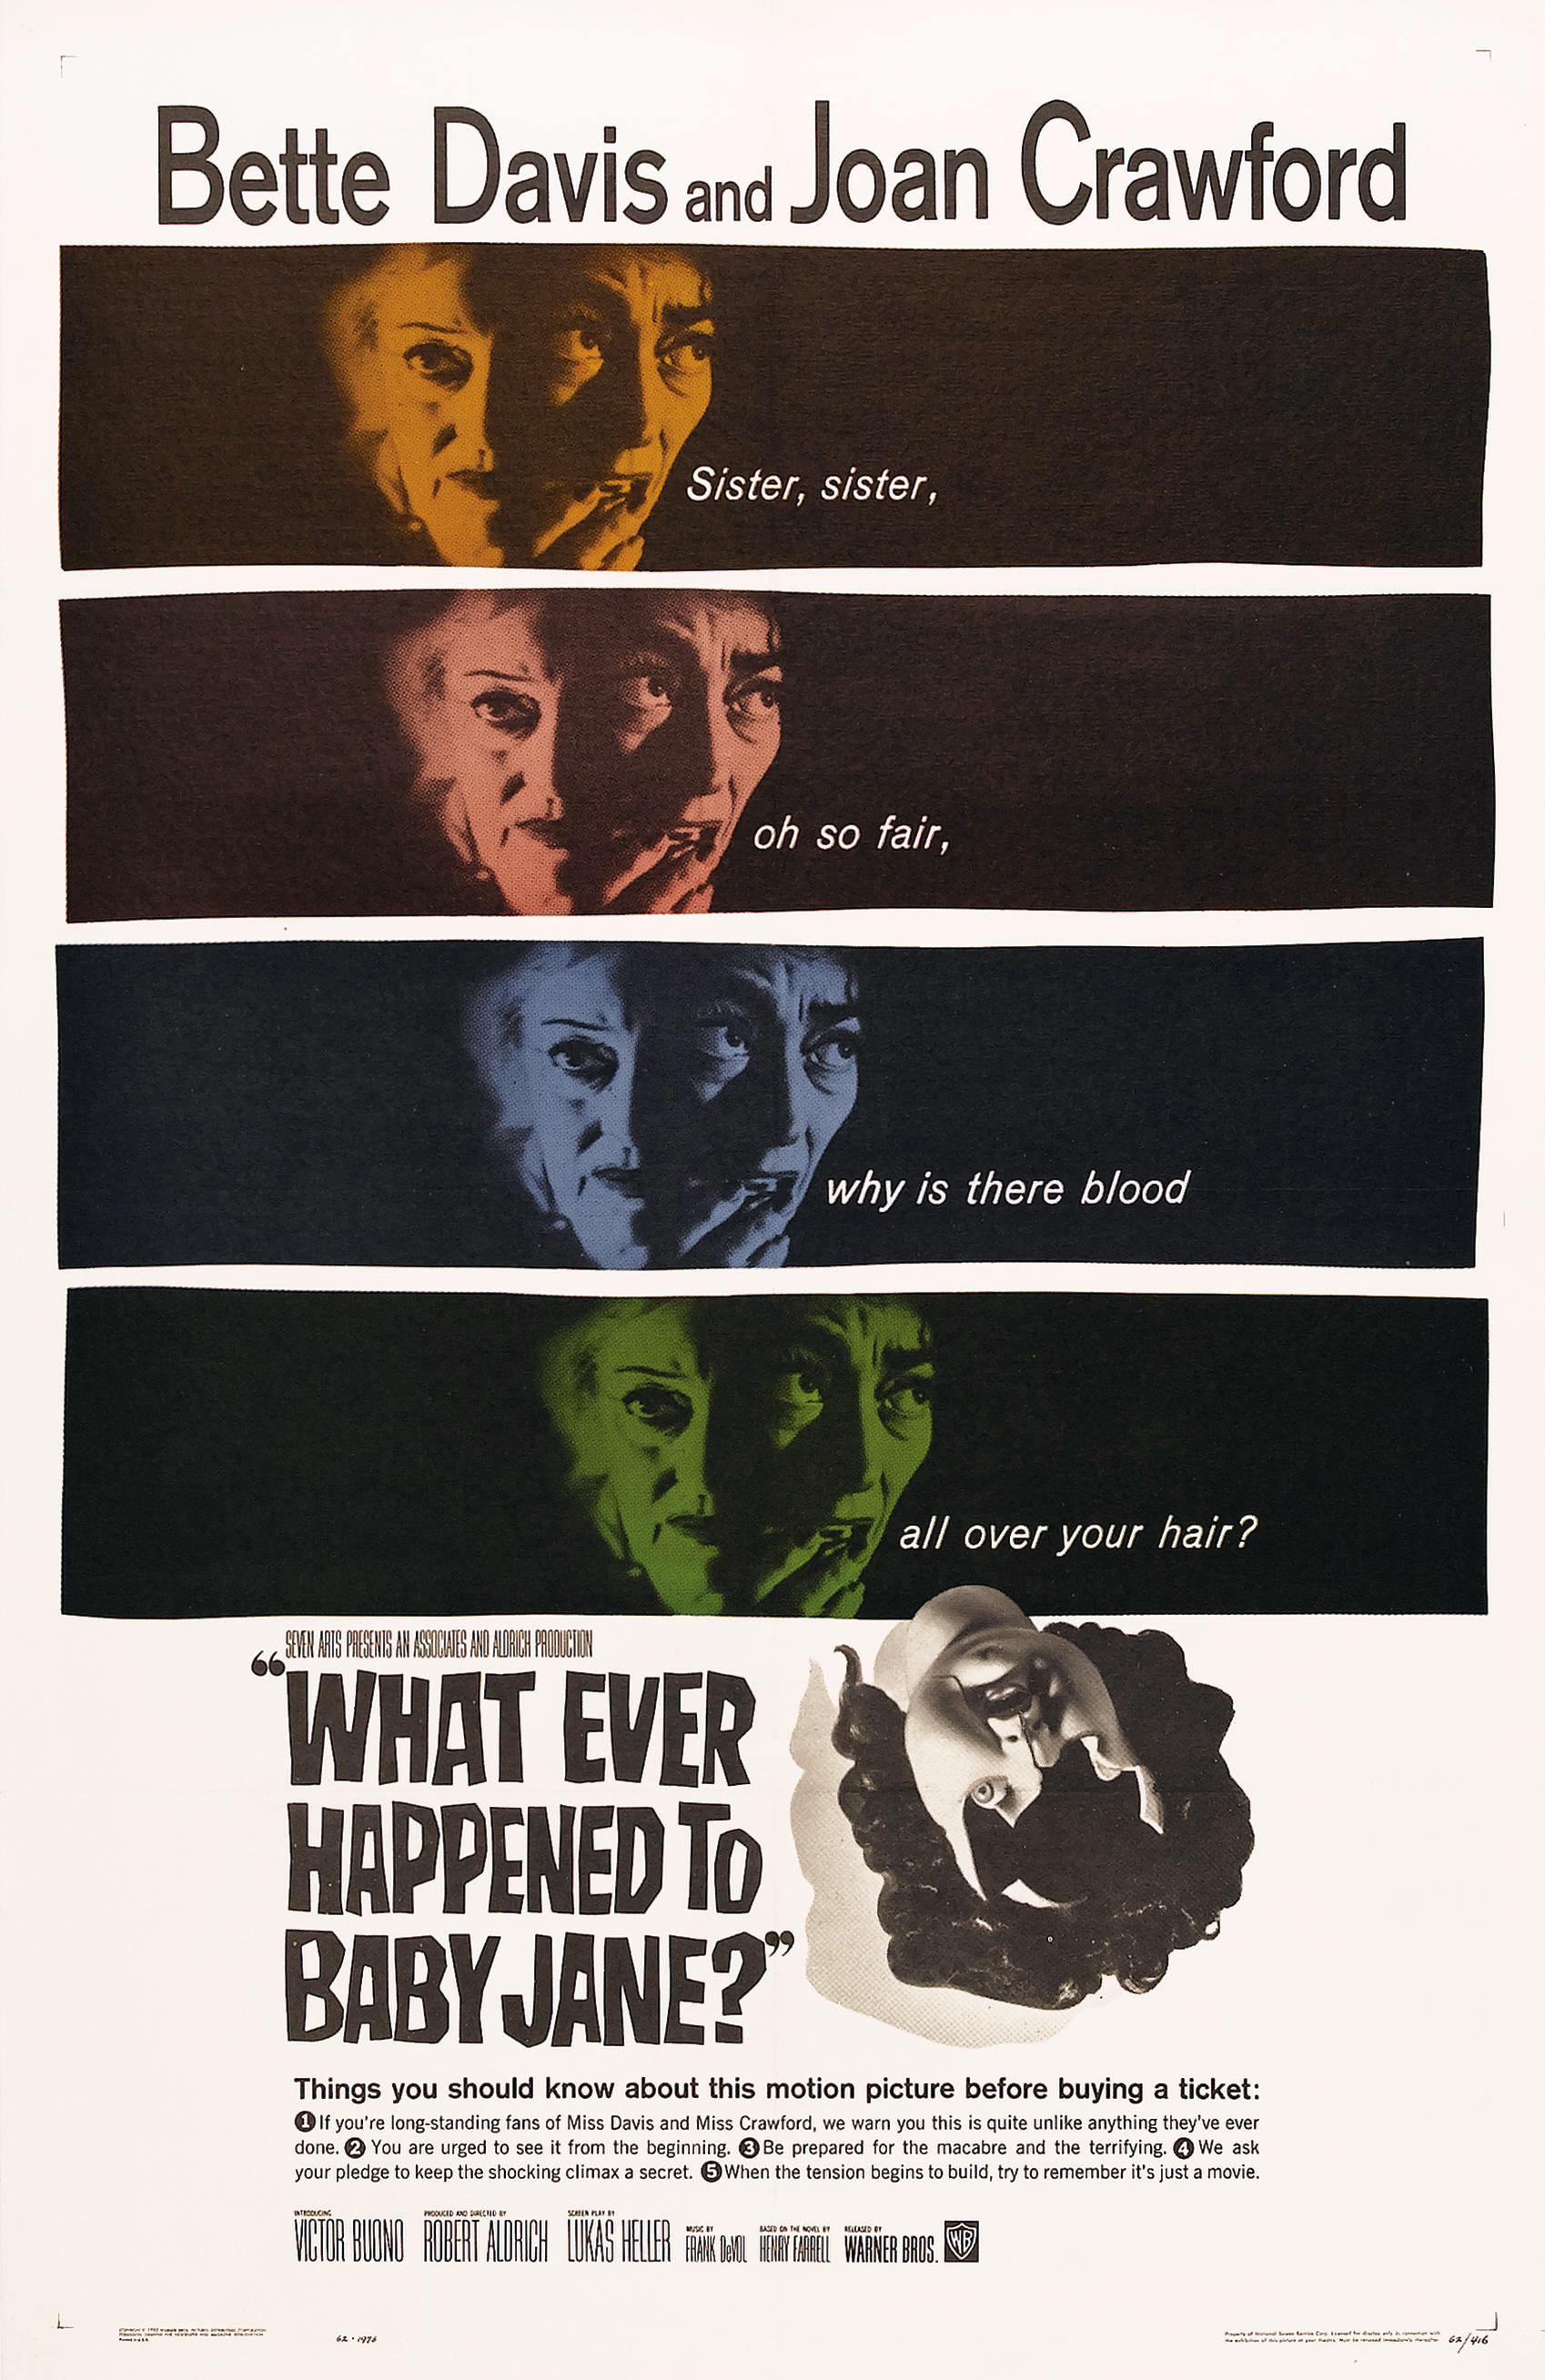 whatever happened to baby jane image